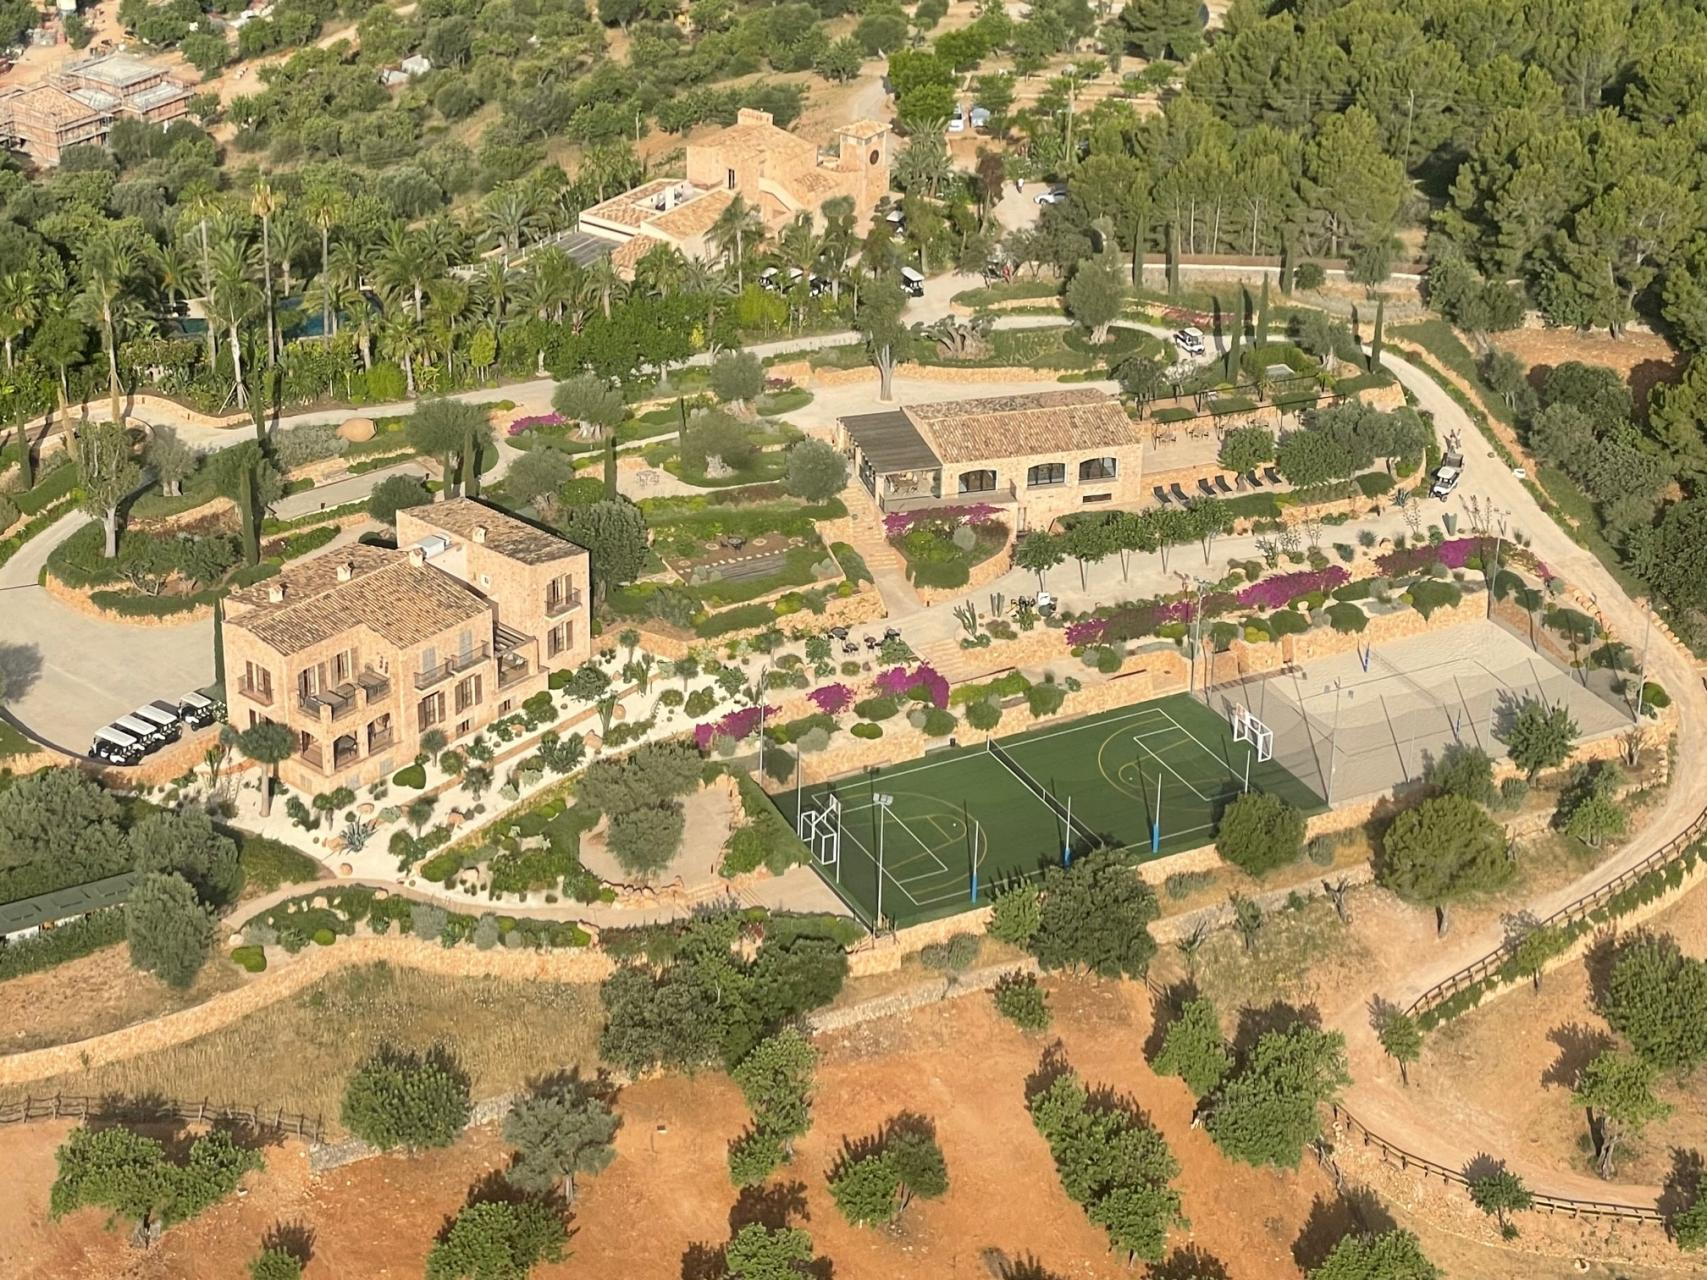 The luxury Majorca mansion the Ronaldo clan is staying at is surrounded by the Tramuntana mountains